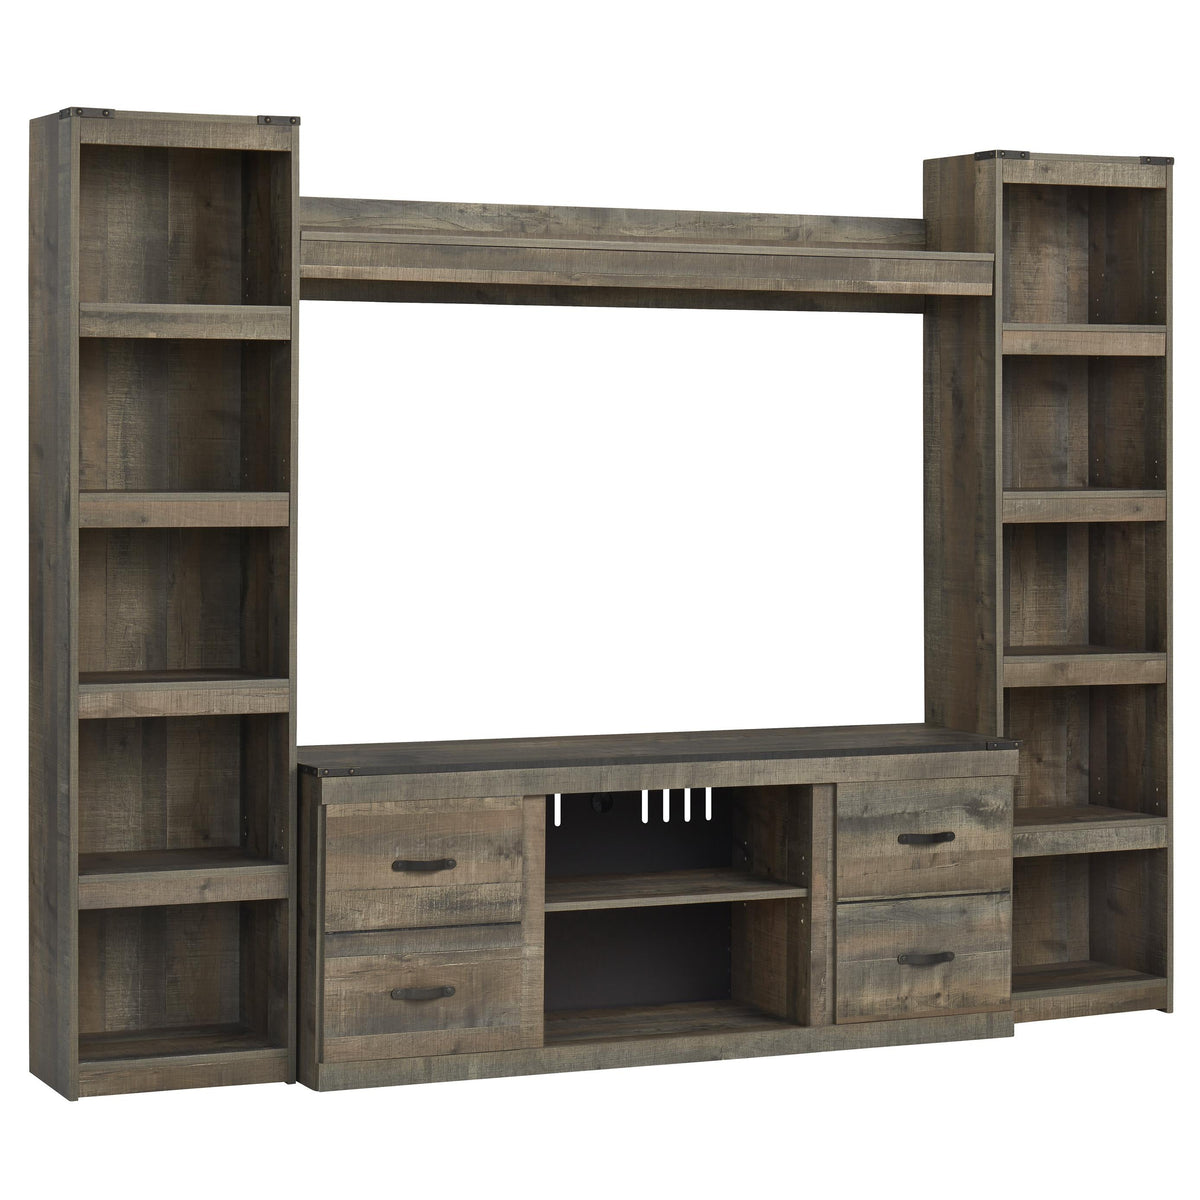 Signature Design by Ashley Trinell EW0446W7 4 pc Entertainment Center